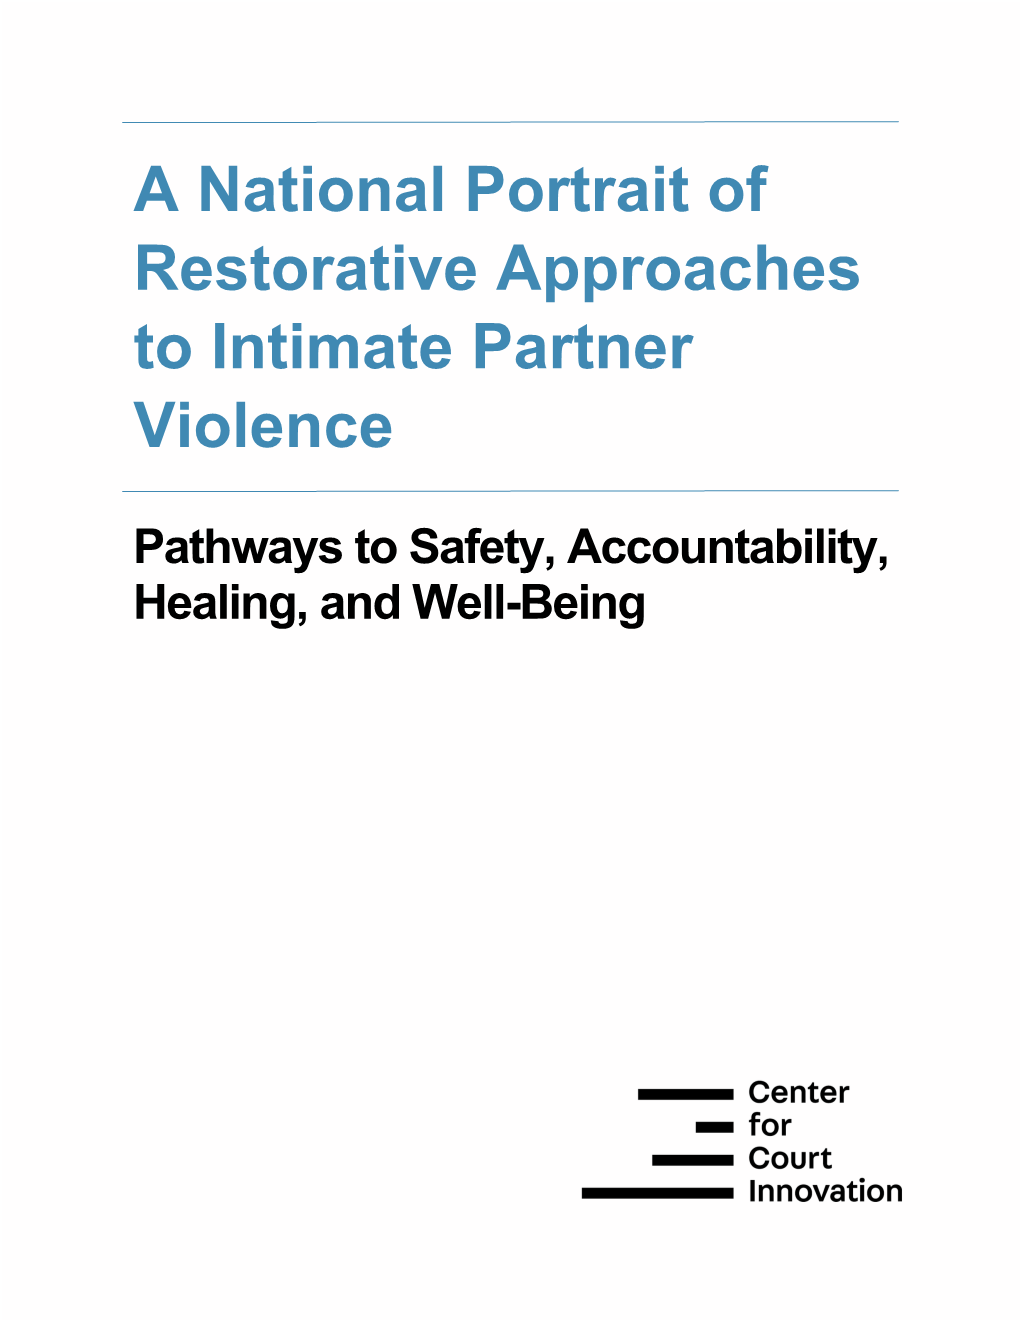 A National Portrait of Restorative Approaches to Intimate Partner Violence